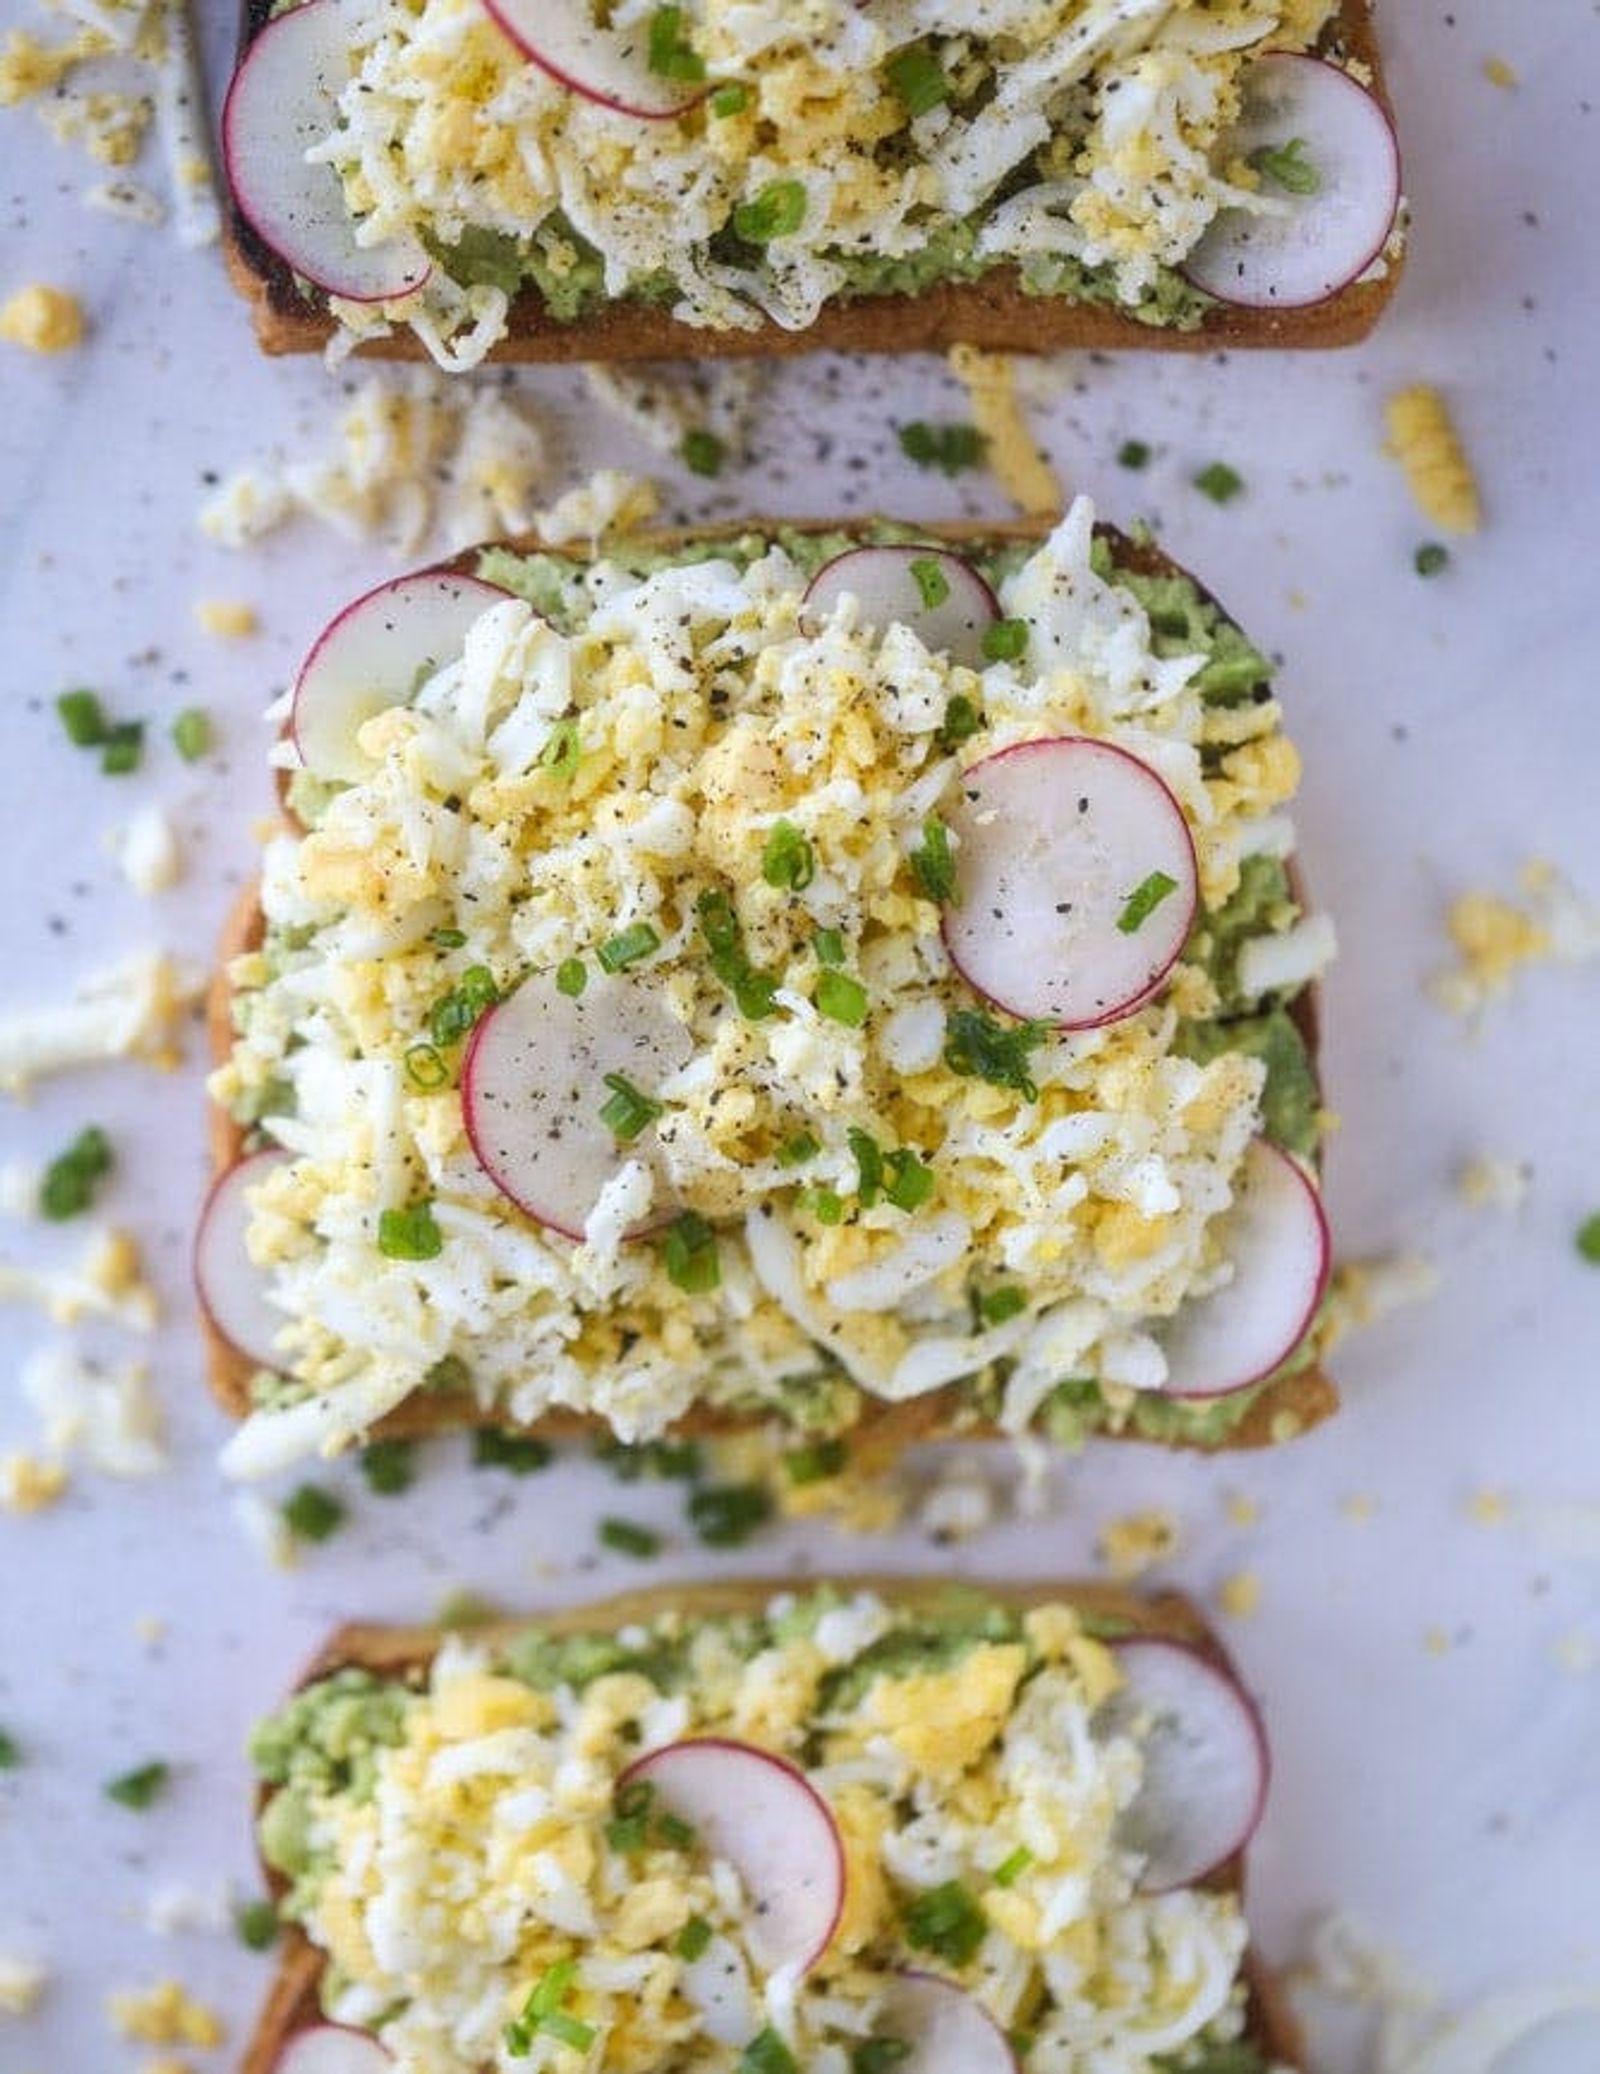 Beef up your usual avocado toast with a shaved hard-boiled egg, salt, and pepper. After noshing on that, you’ll have all the energy you need to conquer the rest of your day, even when that afternoon slump hits. (via <strong><a href="https://www.howsweeteats.com/2018/05/egg-avocado-toast/">How Sweet Eats</a></strong>)